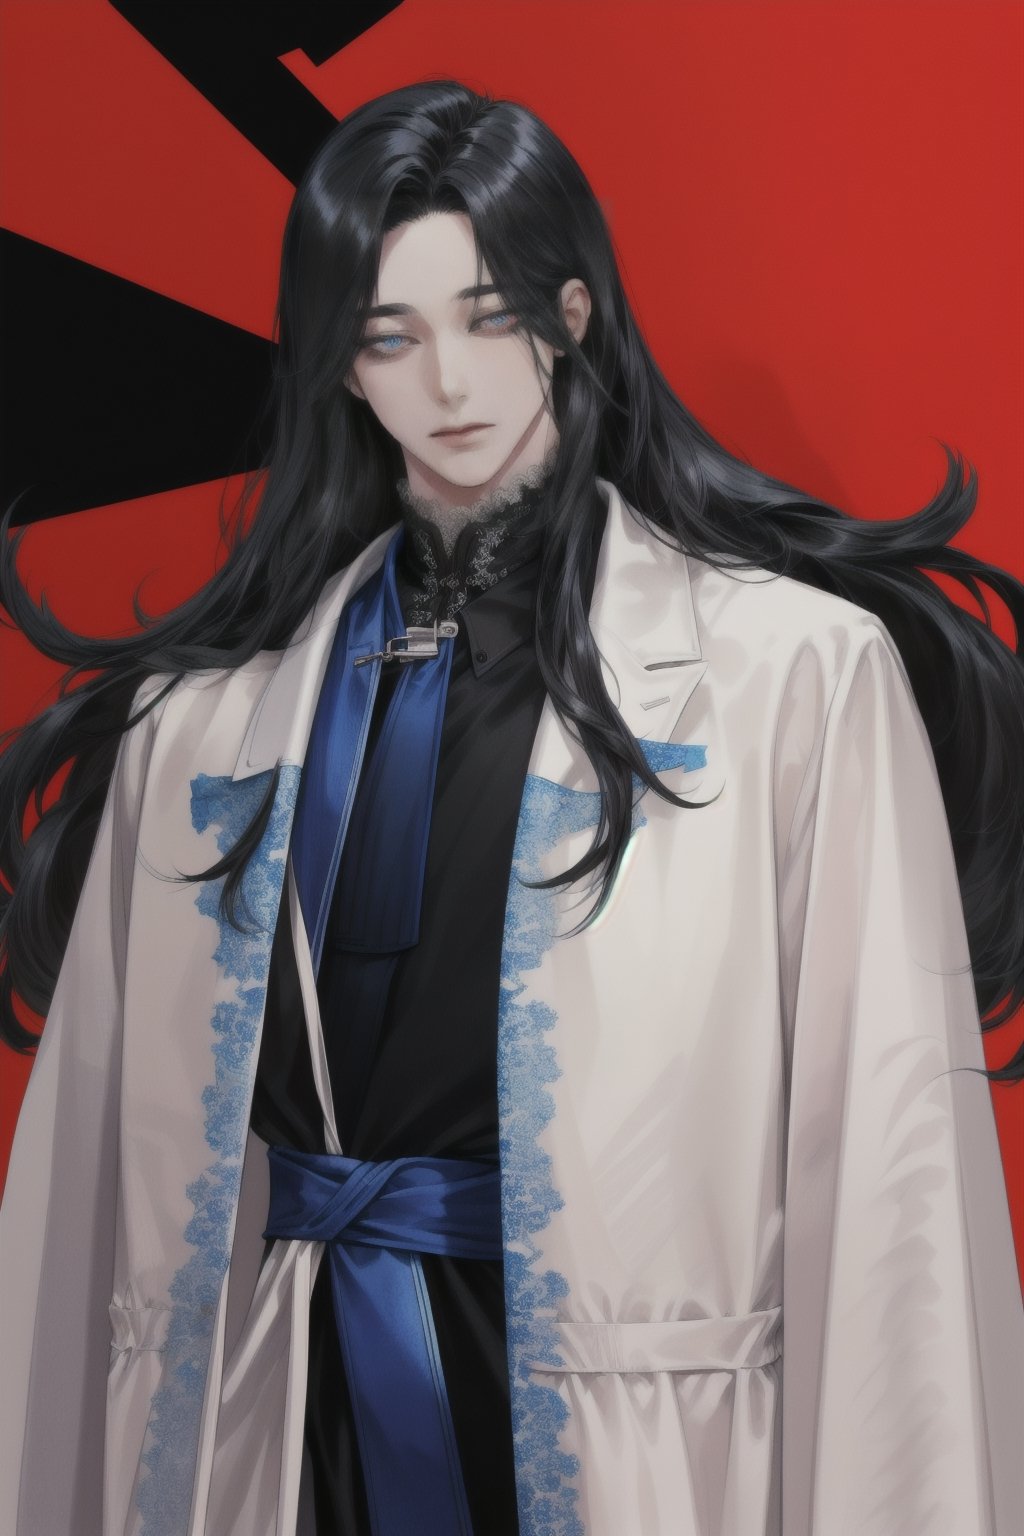 a man with long black hair with white tips, blue right eye, red left eye, 1.80 cm tall